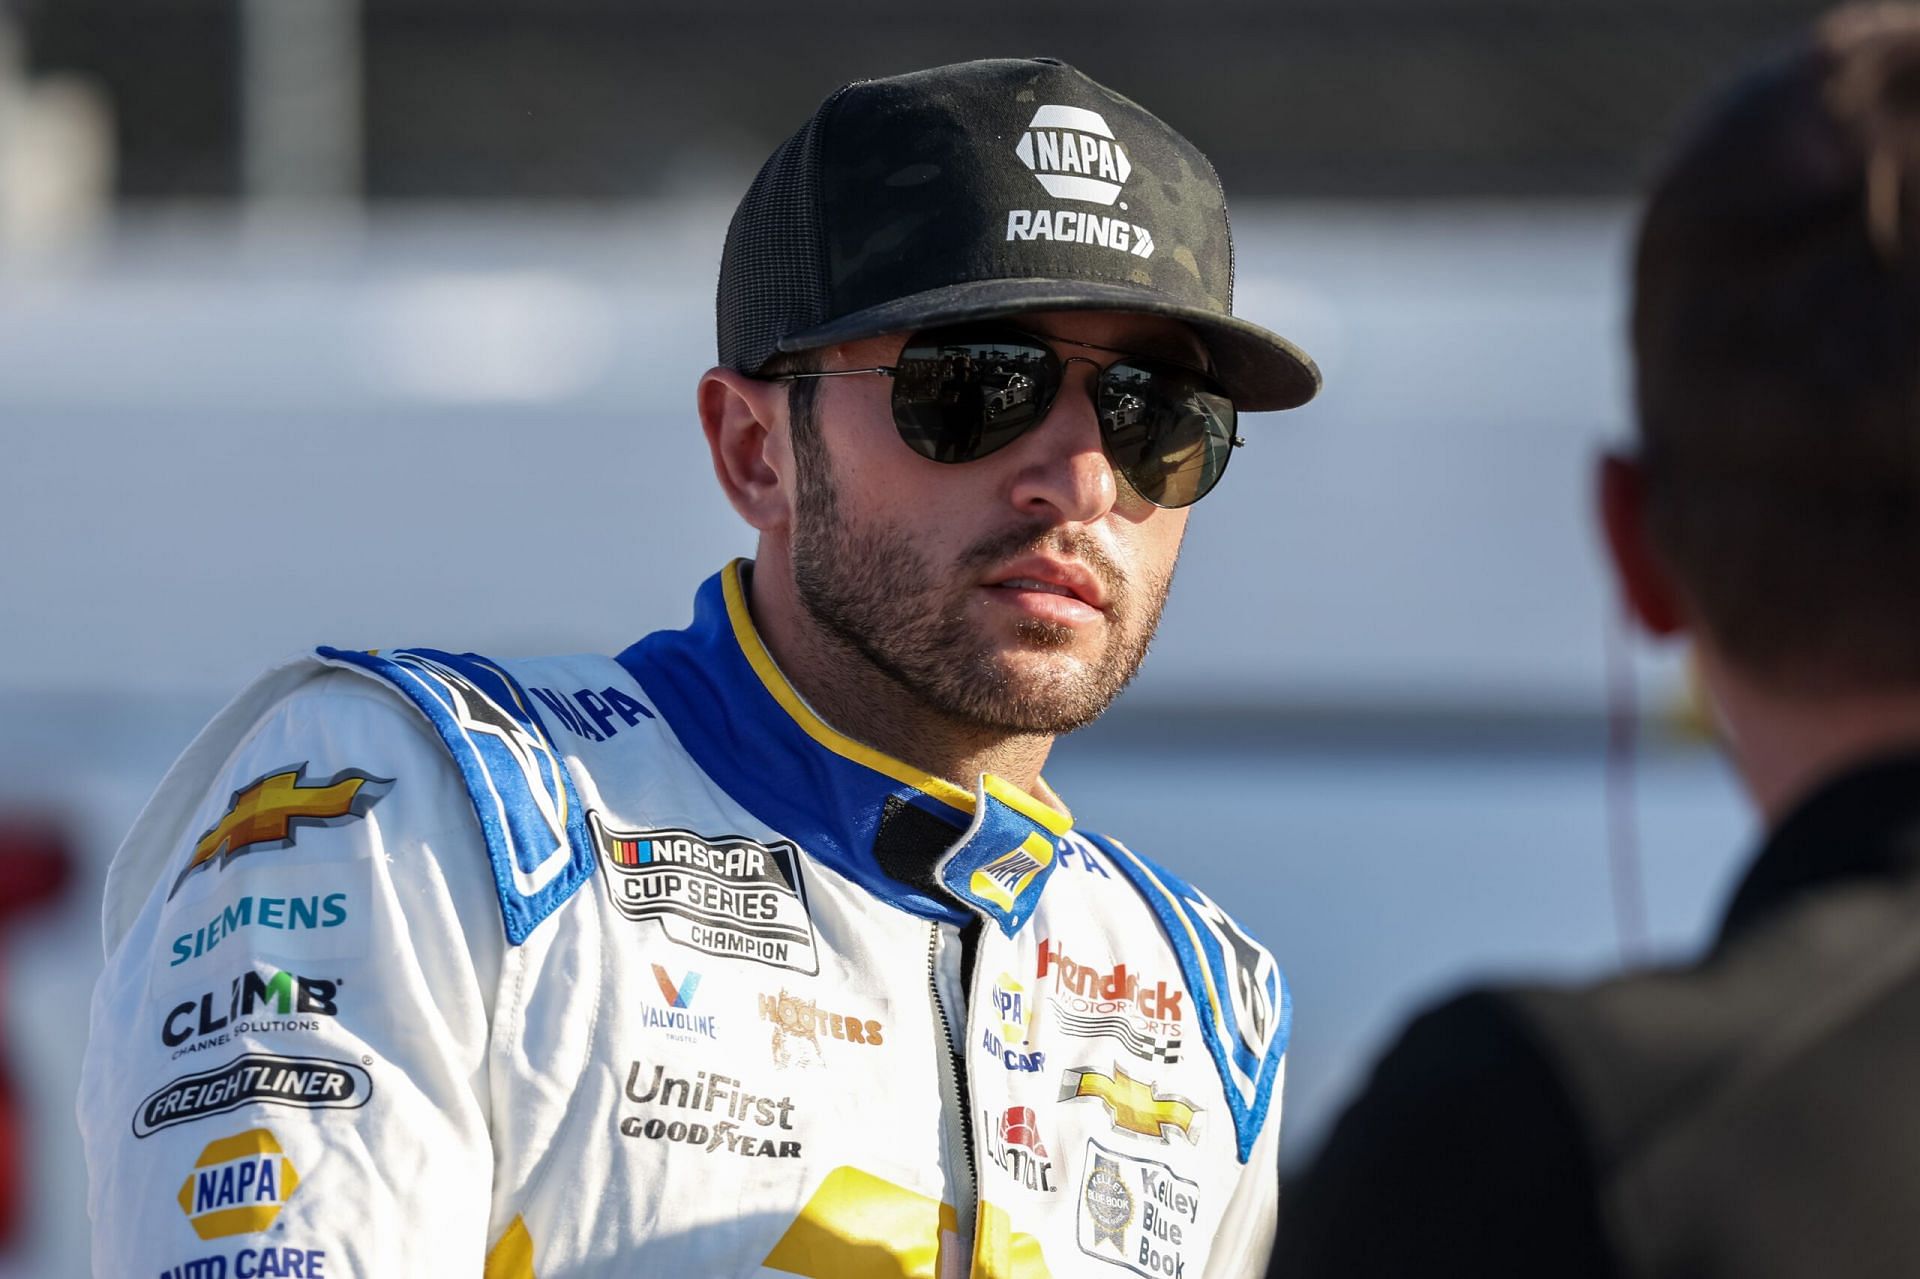 NASCAR Cup Series driver for Hendrick Motorsports, Chase Elliott. Picture Credit: David Yeazell-USA TODAY Sports